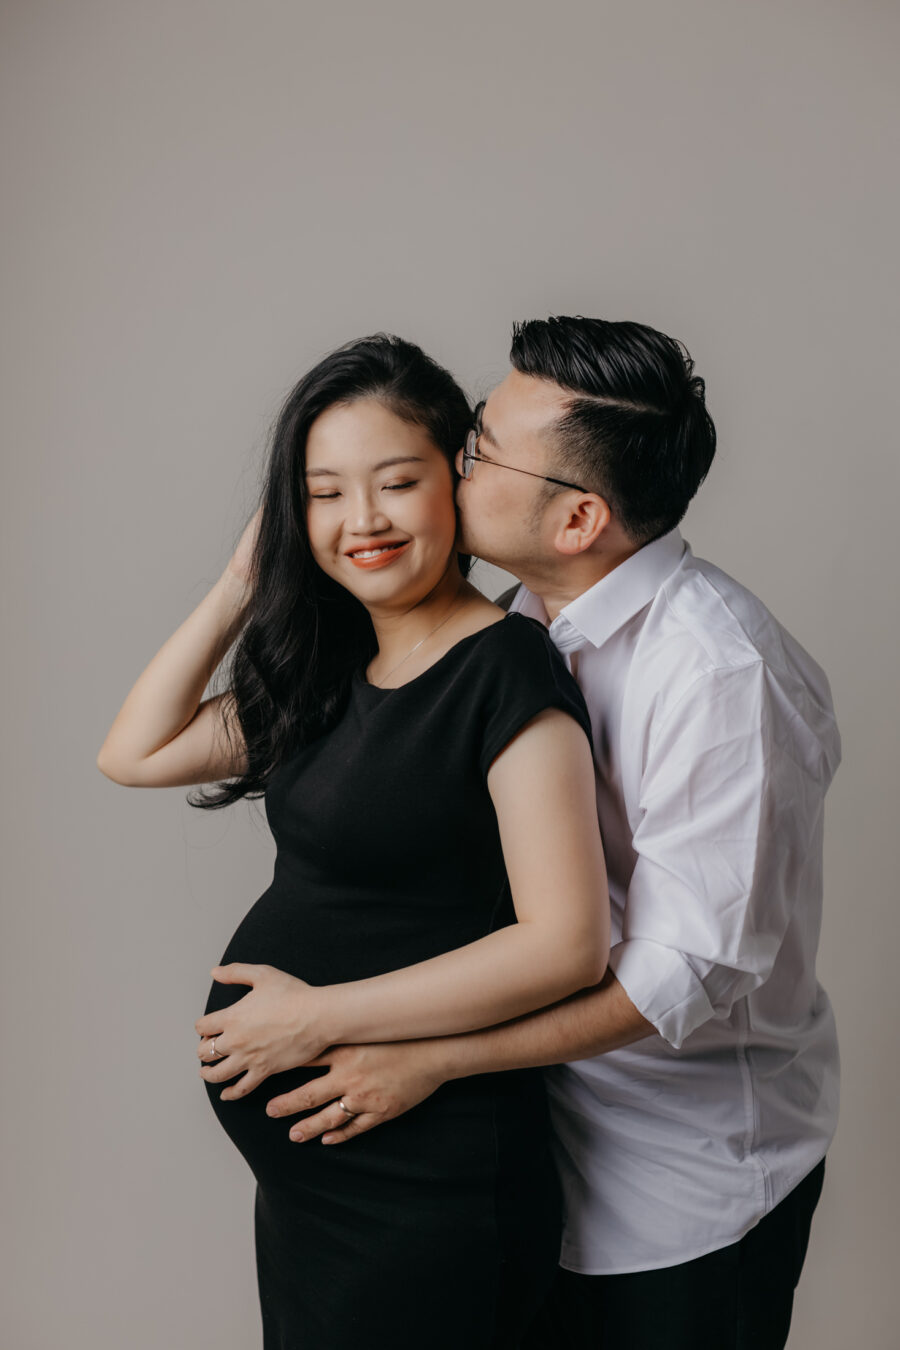 Expectant parents embracing during mini maternity session at Darkroom Project Studio